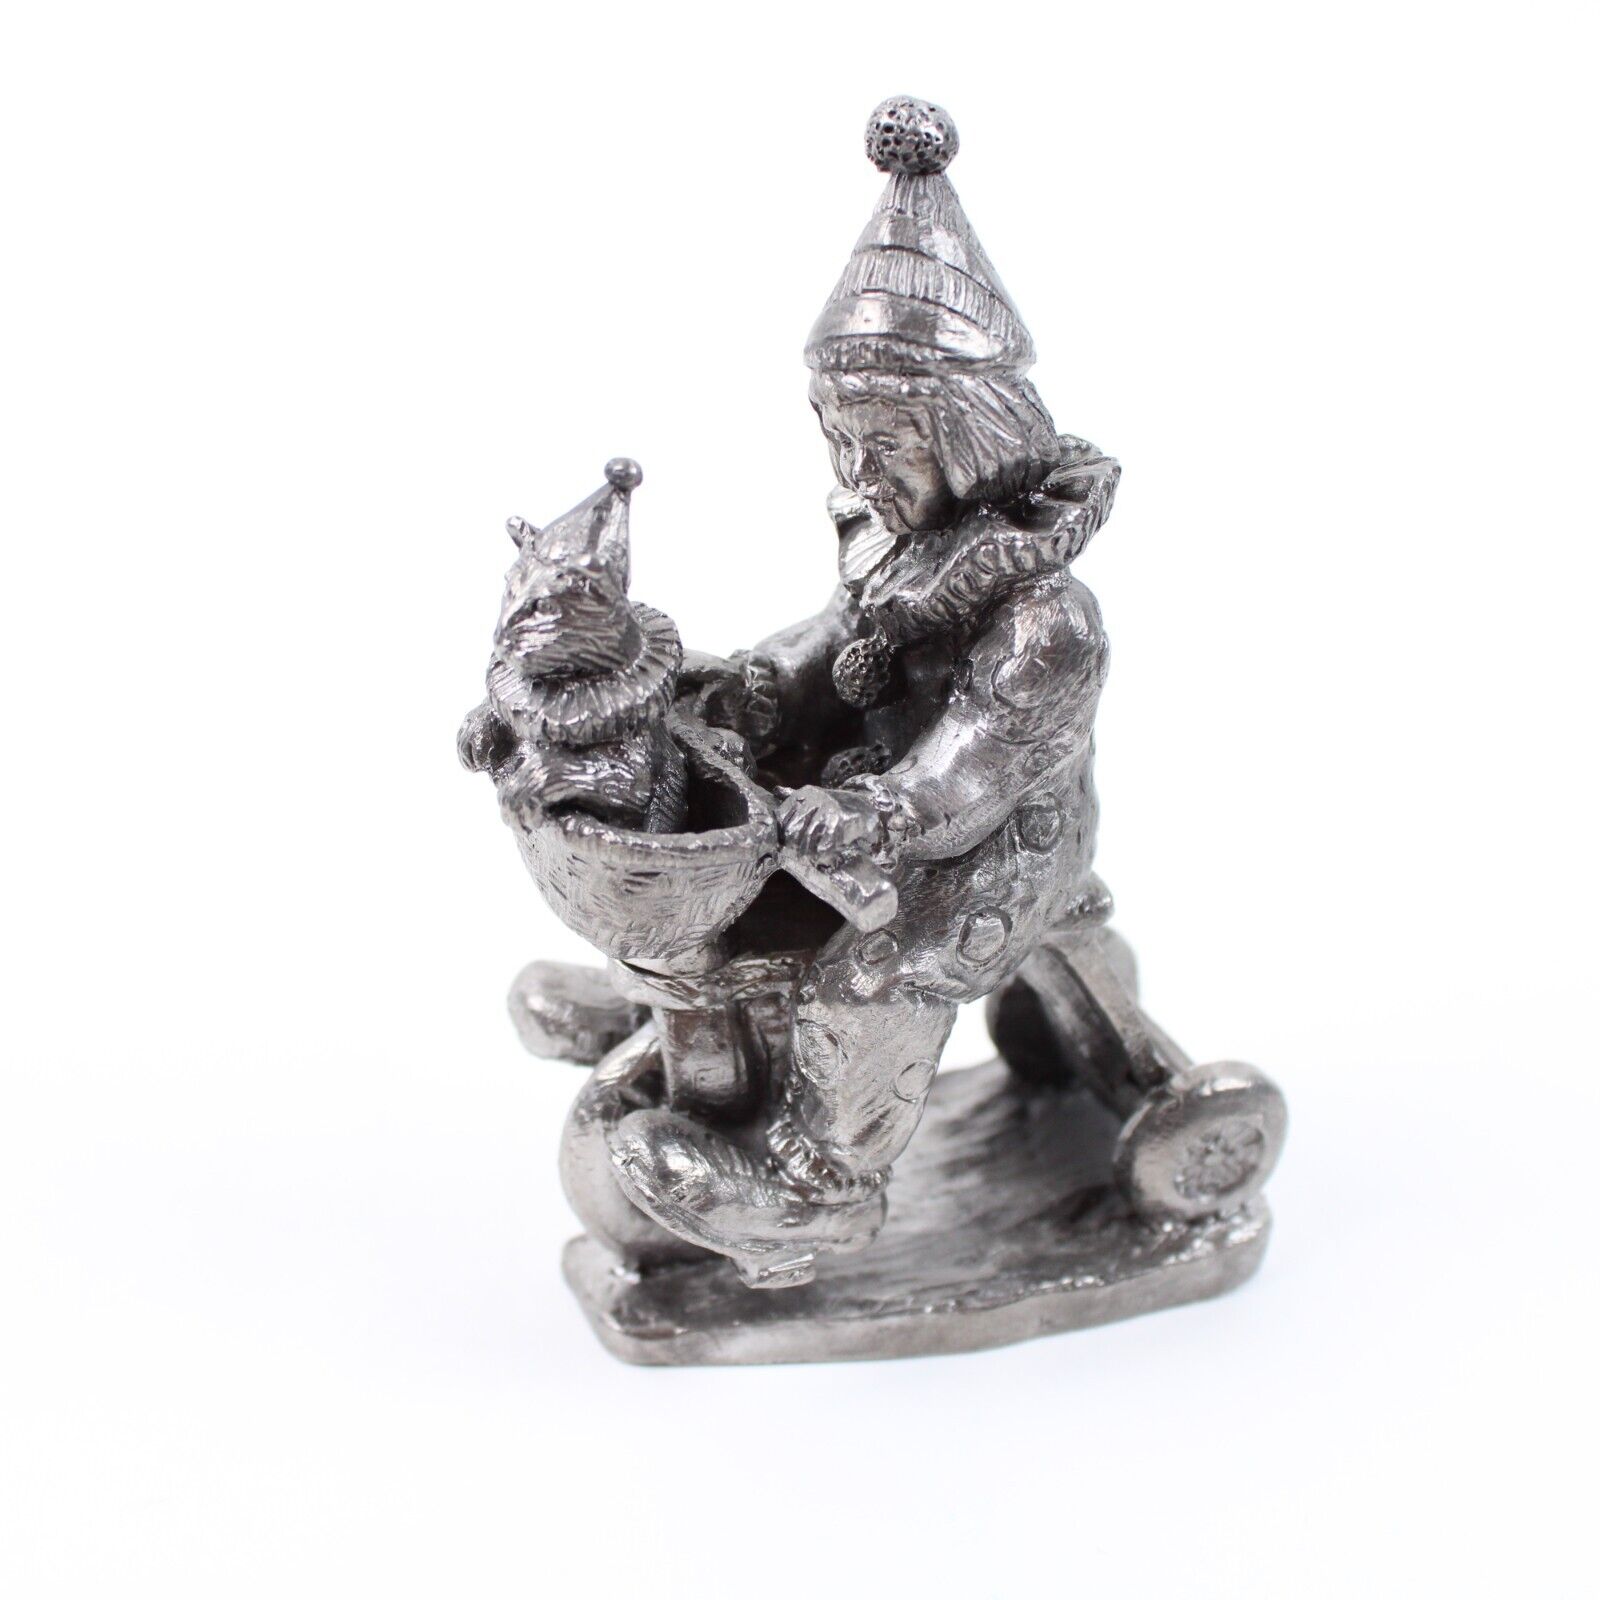 Michael Ricker Pewter Clown On Bike with Cat Figurine 1997 Handcrafted